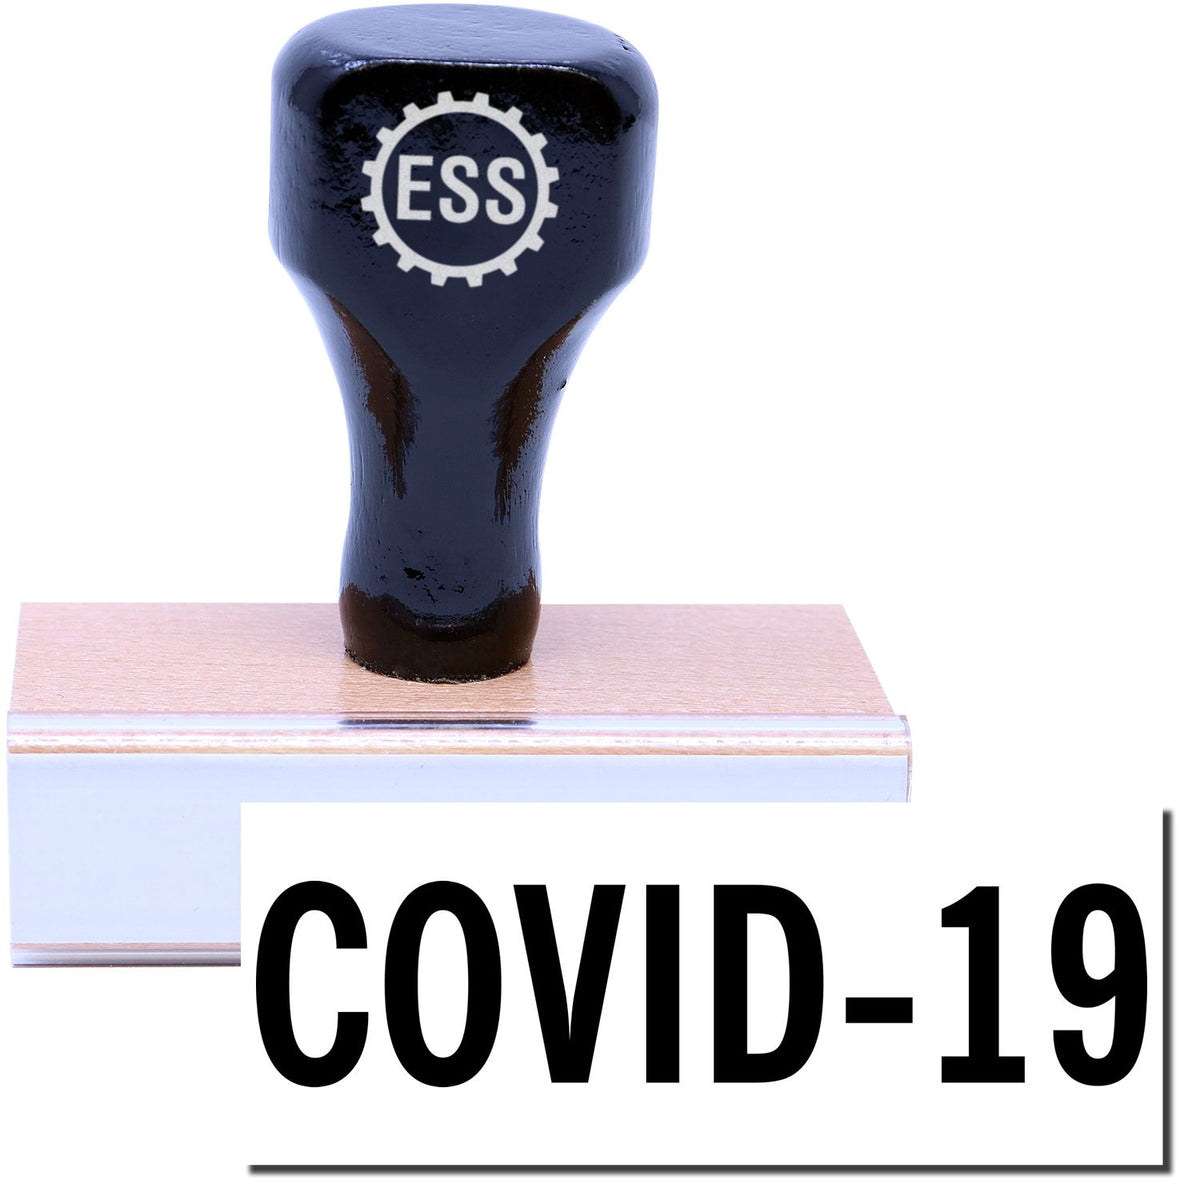 A stock office rubber stamp with a stamped image showing how the text &quot;COVID-19&quot; in a large bold font is displayed after stamping.